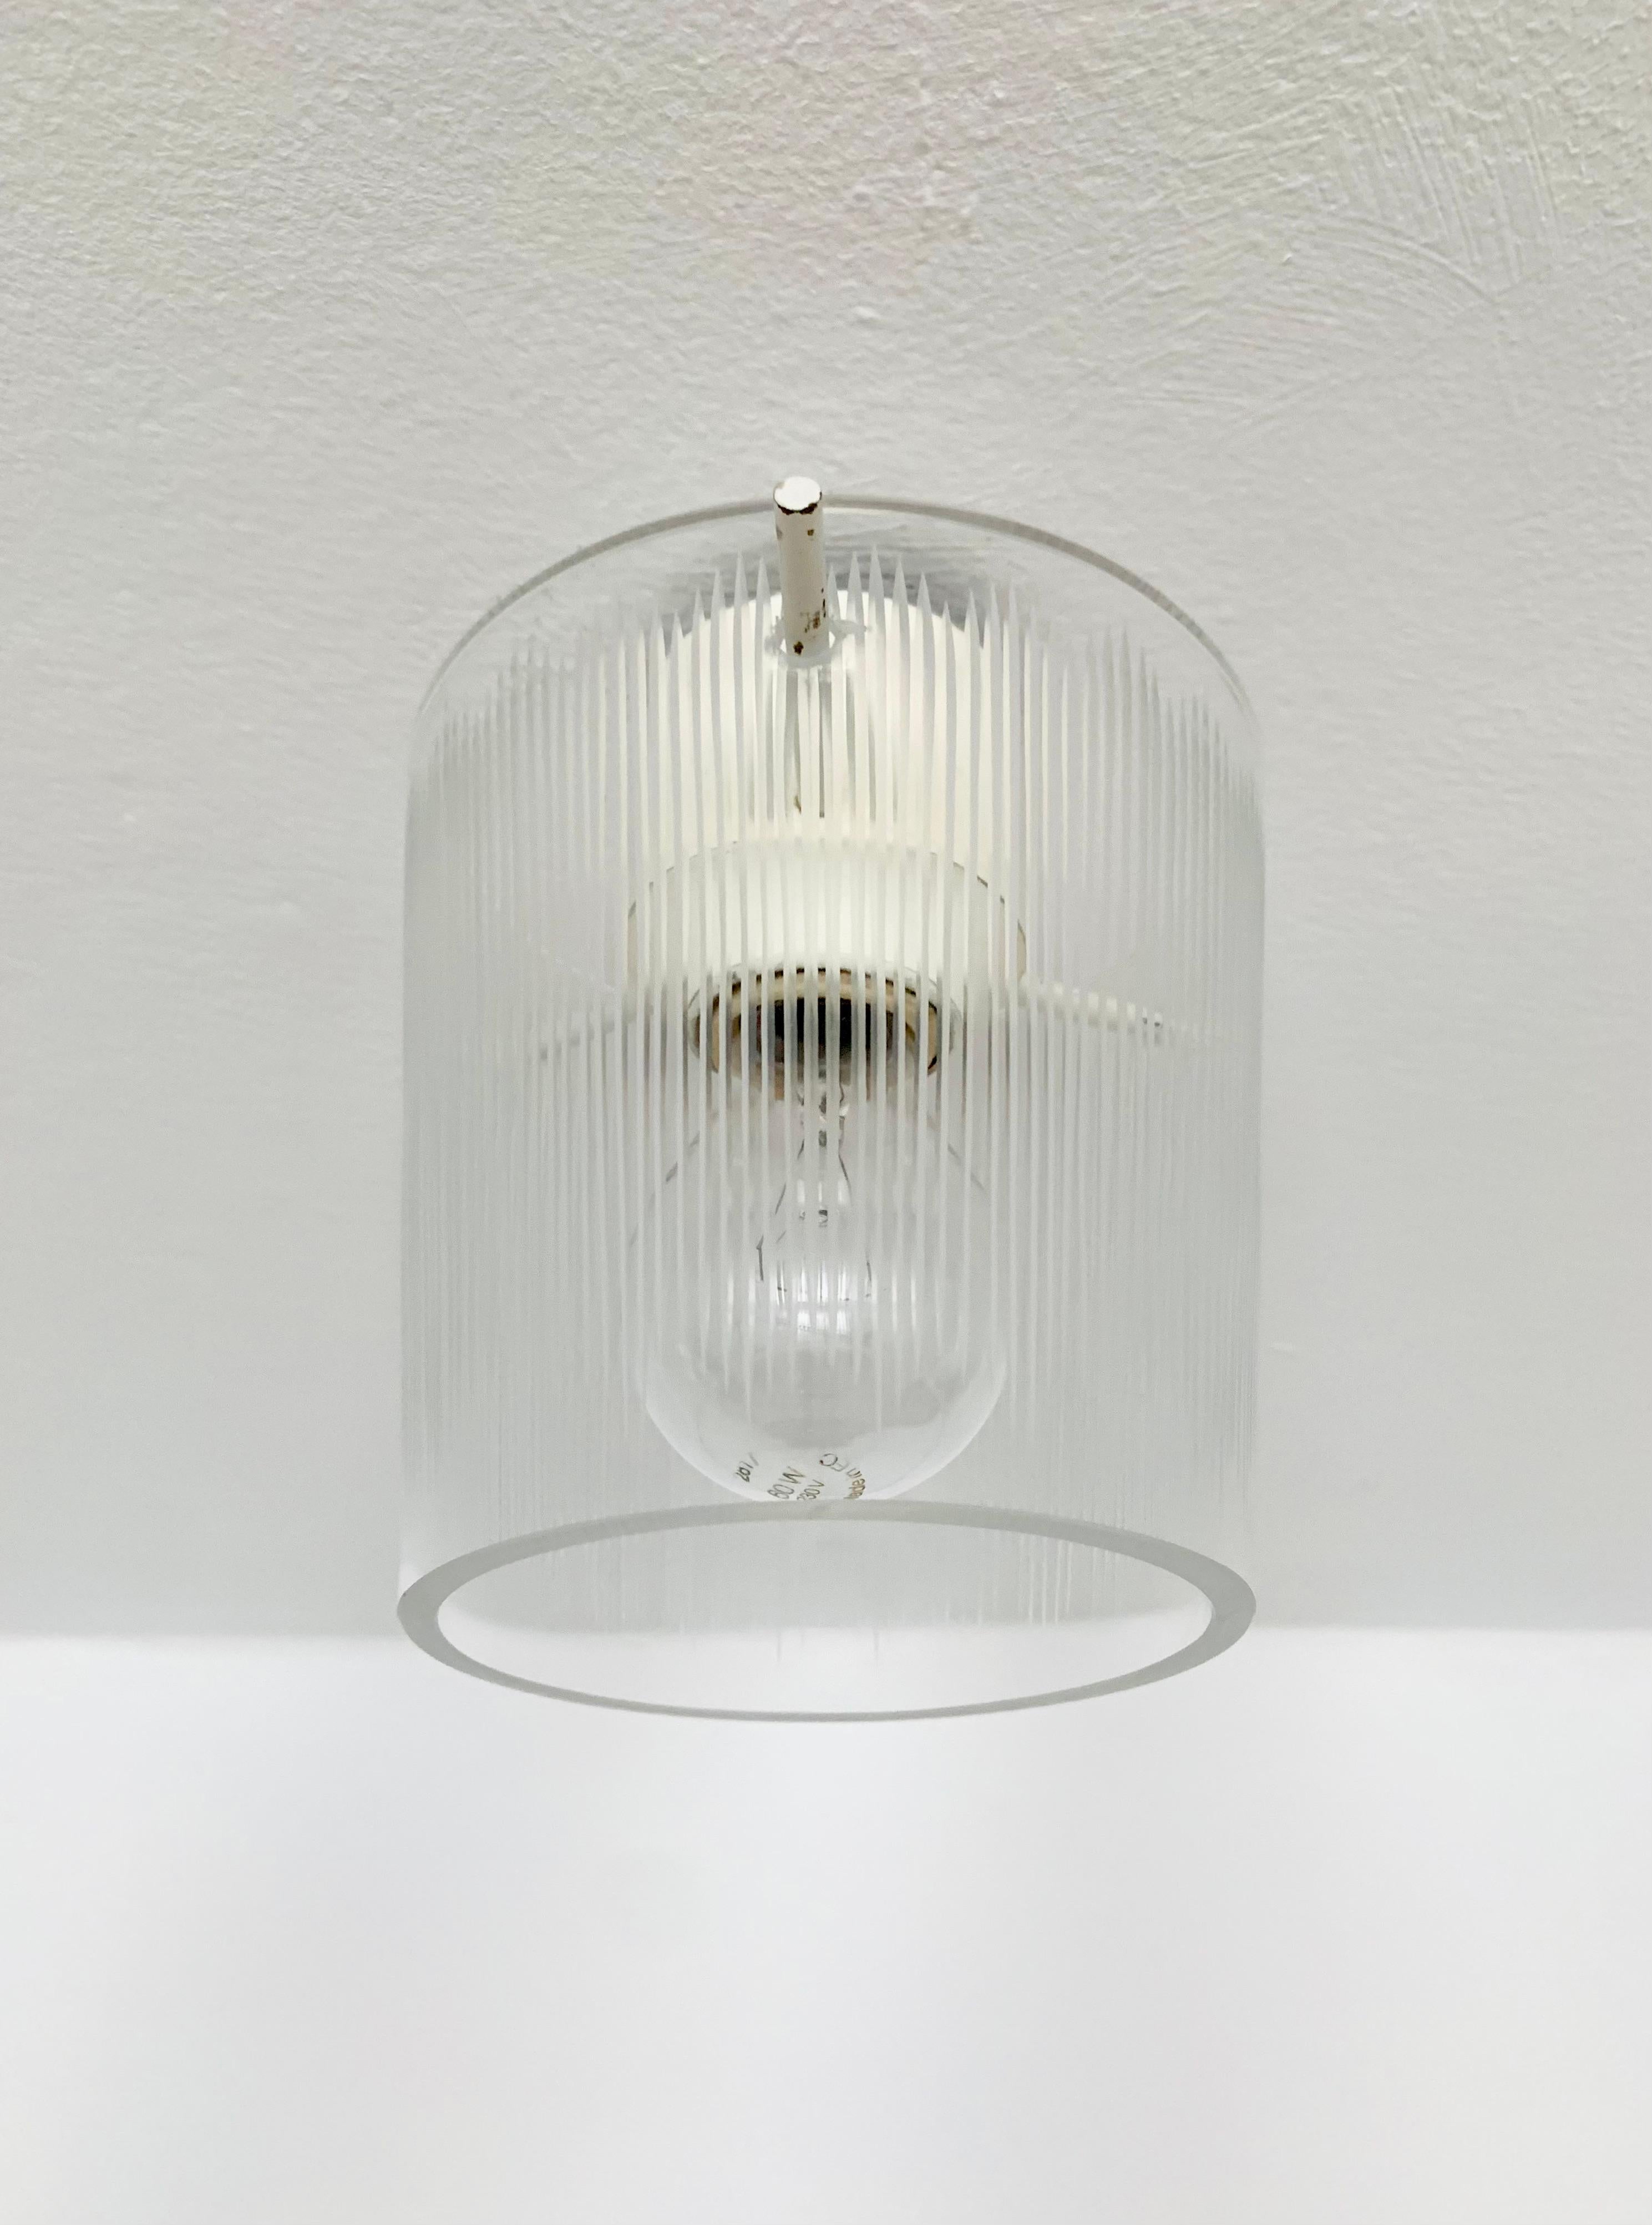 Wonderful small crystal glass ceiling lamp from the 1950s.
Beautiful, reduced design and a real eye-catcher in every home.
The cut glass creates a spectacular lighting effect.

Condition:

Very good vintage condition with minimal age-related signs